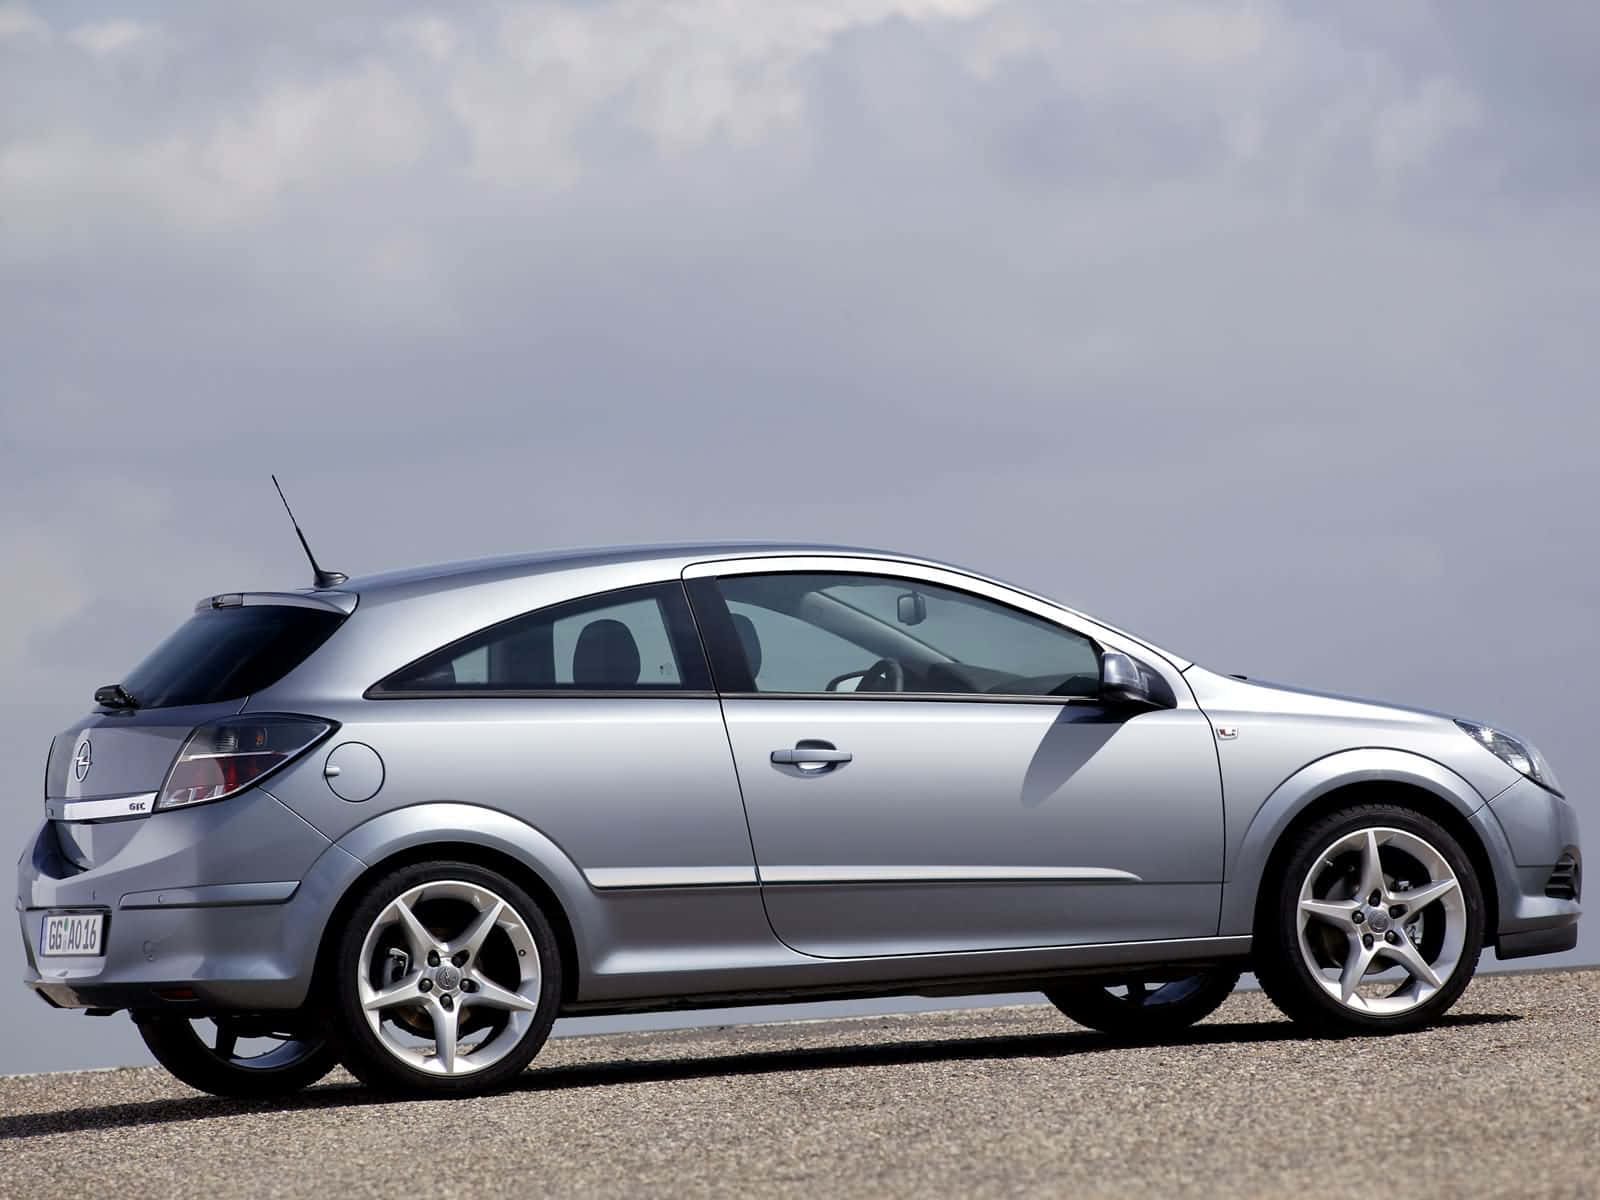 Sleek and stylish Opel Astra driving on the open road. Wallpaper